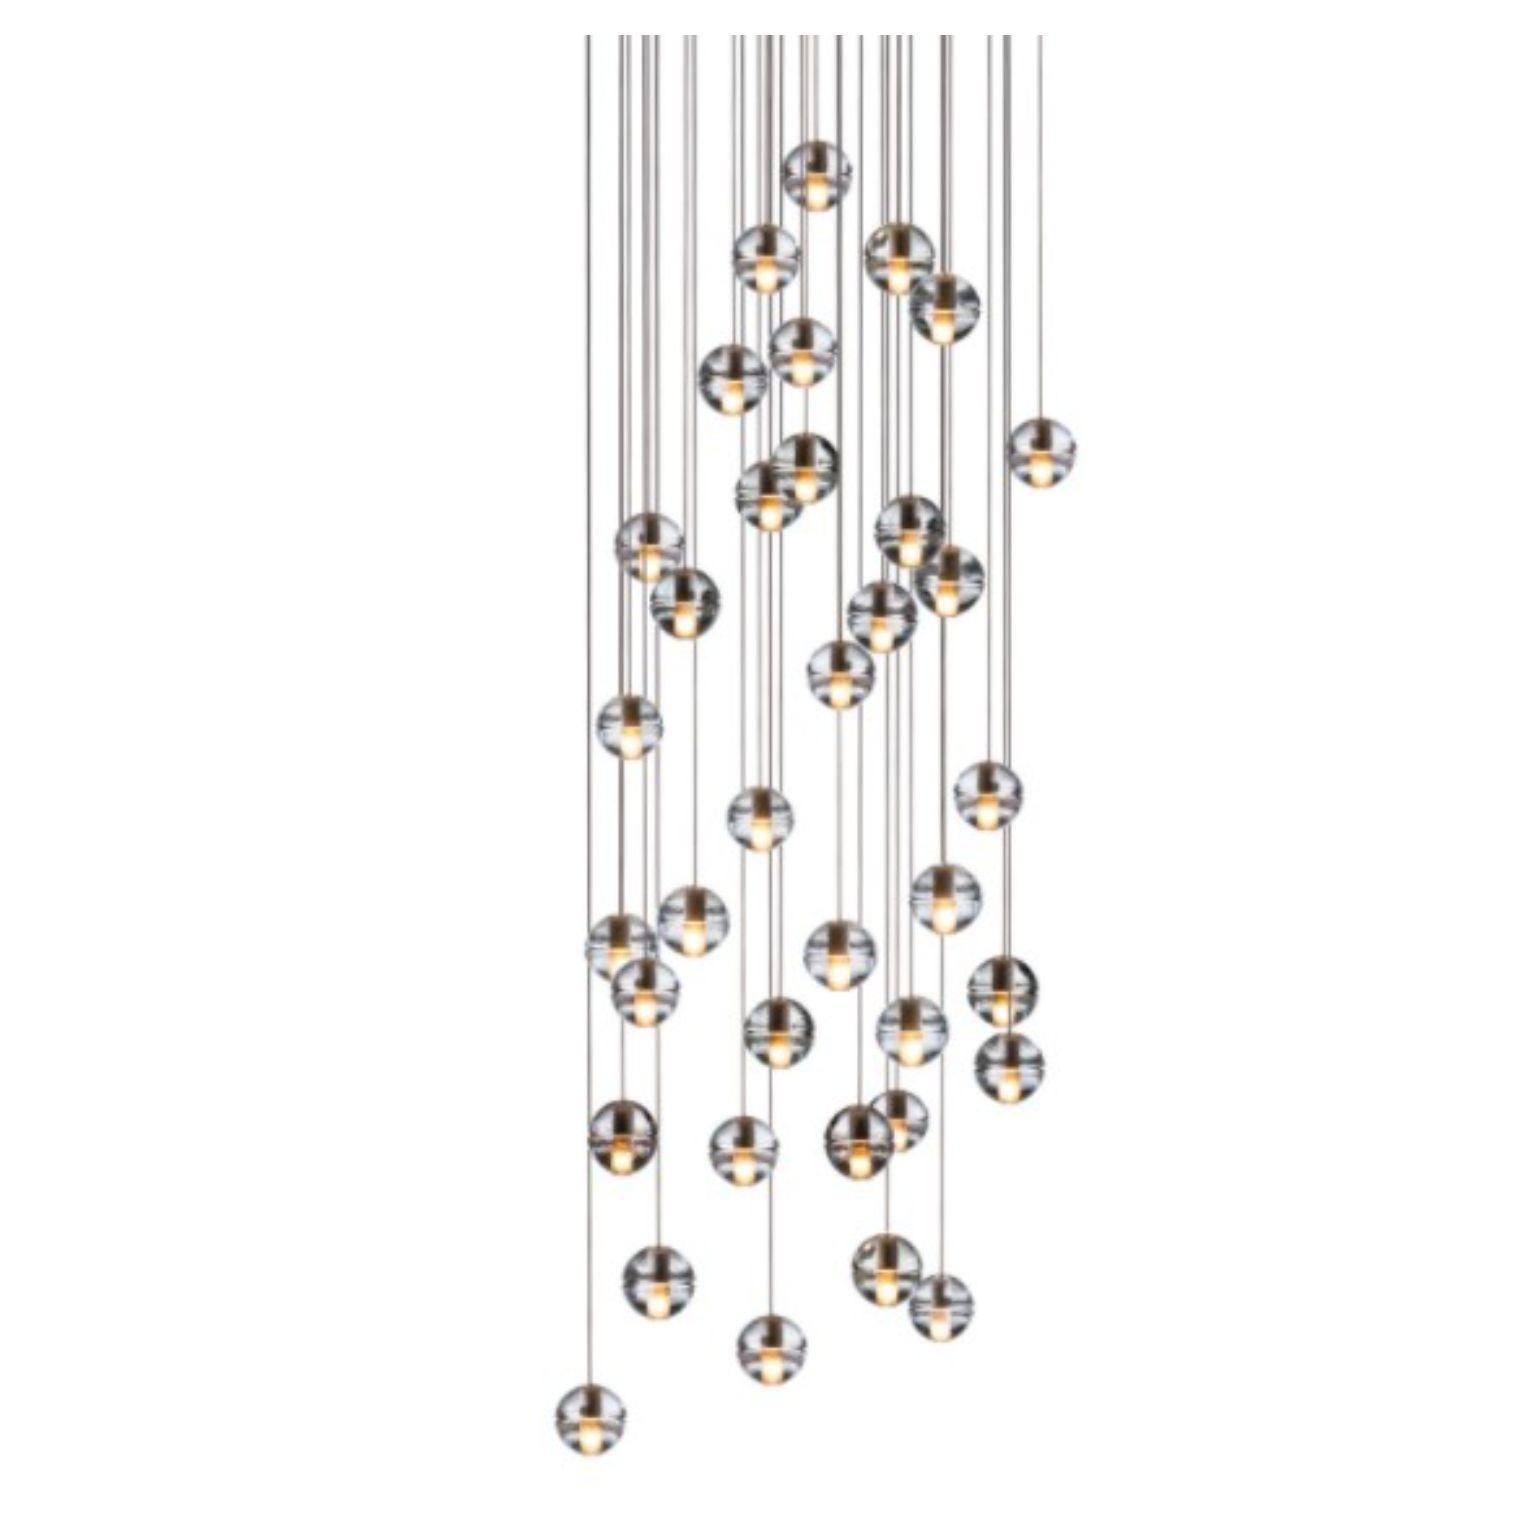 14.36 Round pendant by Bocci
Dimensions: D 75.5 x H 200 cm
Materials: white powder coated round canopy
Weight: 83.5 kg
Available: round, rectangle and square version.

All our lamps can be wired according to each country. If sold to the USA it